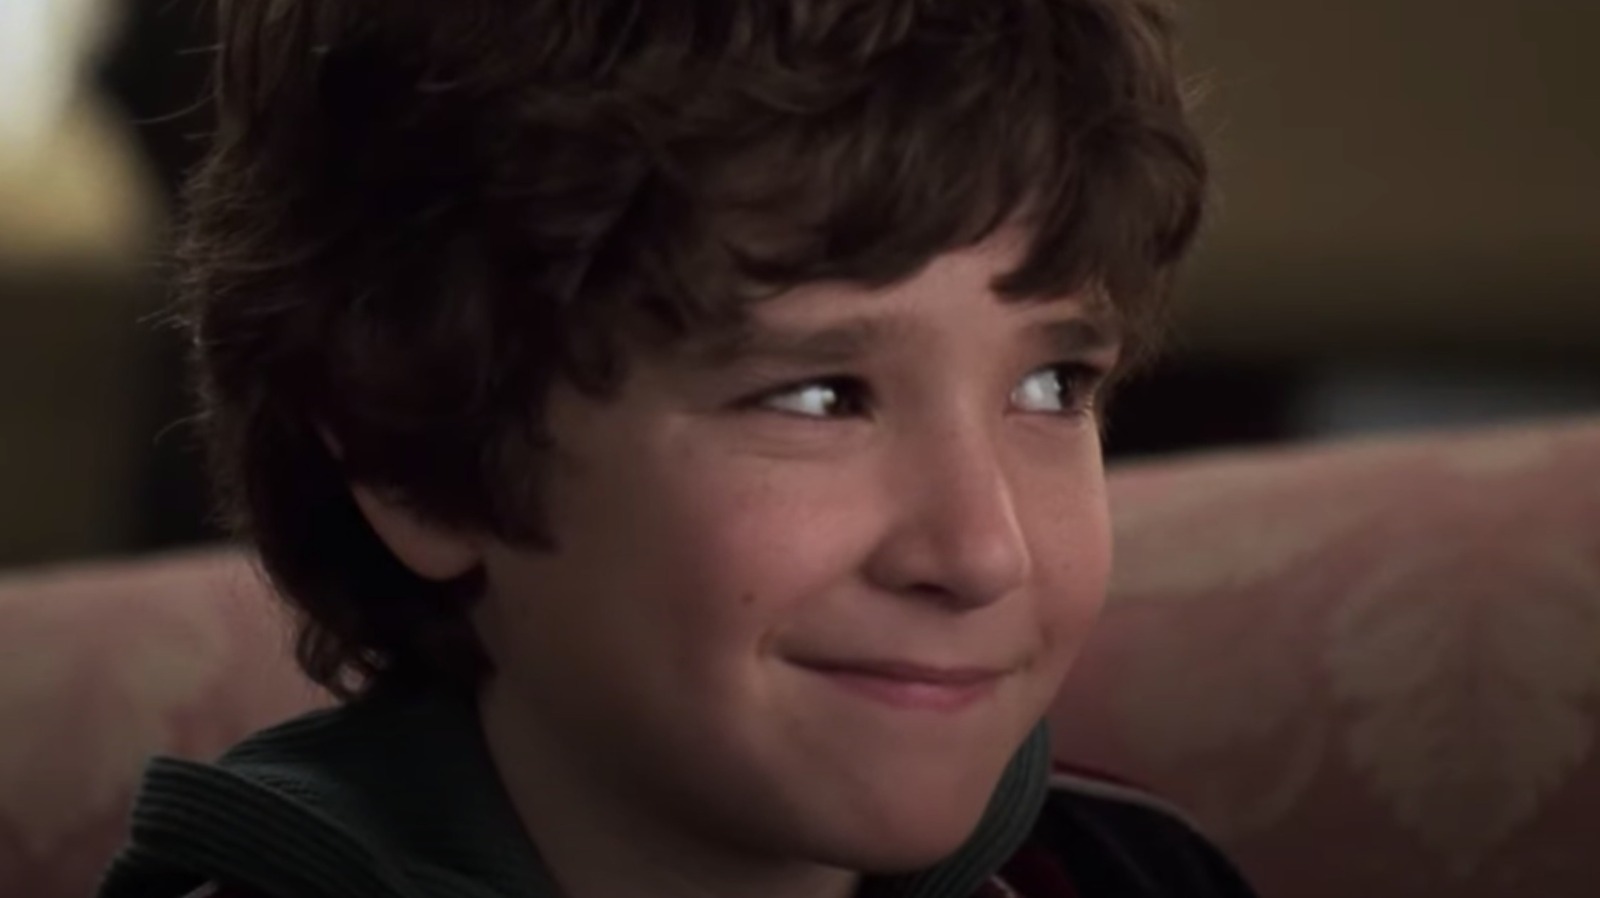 The Little Boy From Jumanji Is All Grown Up And Unrecognizable